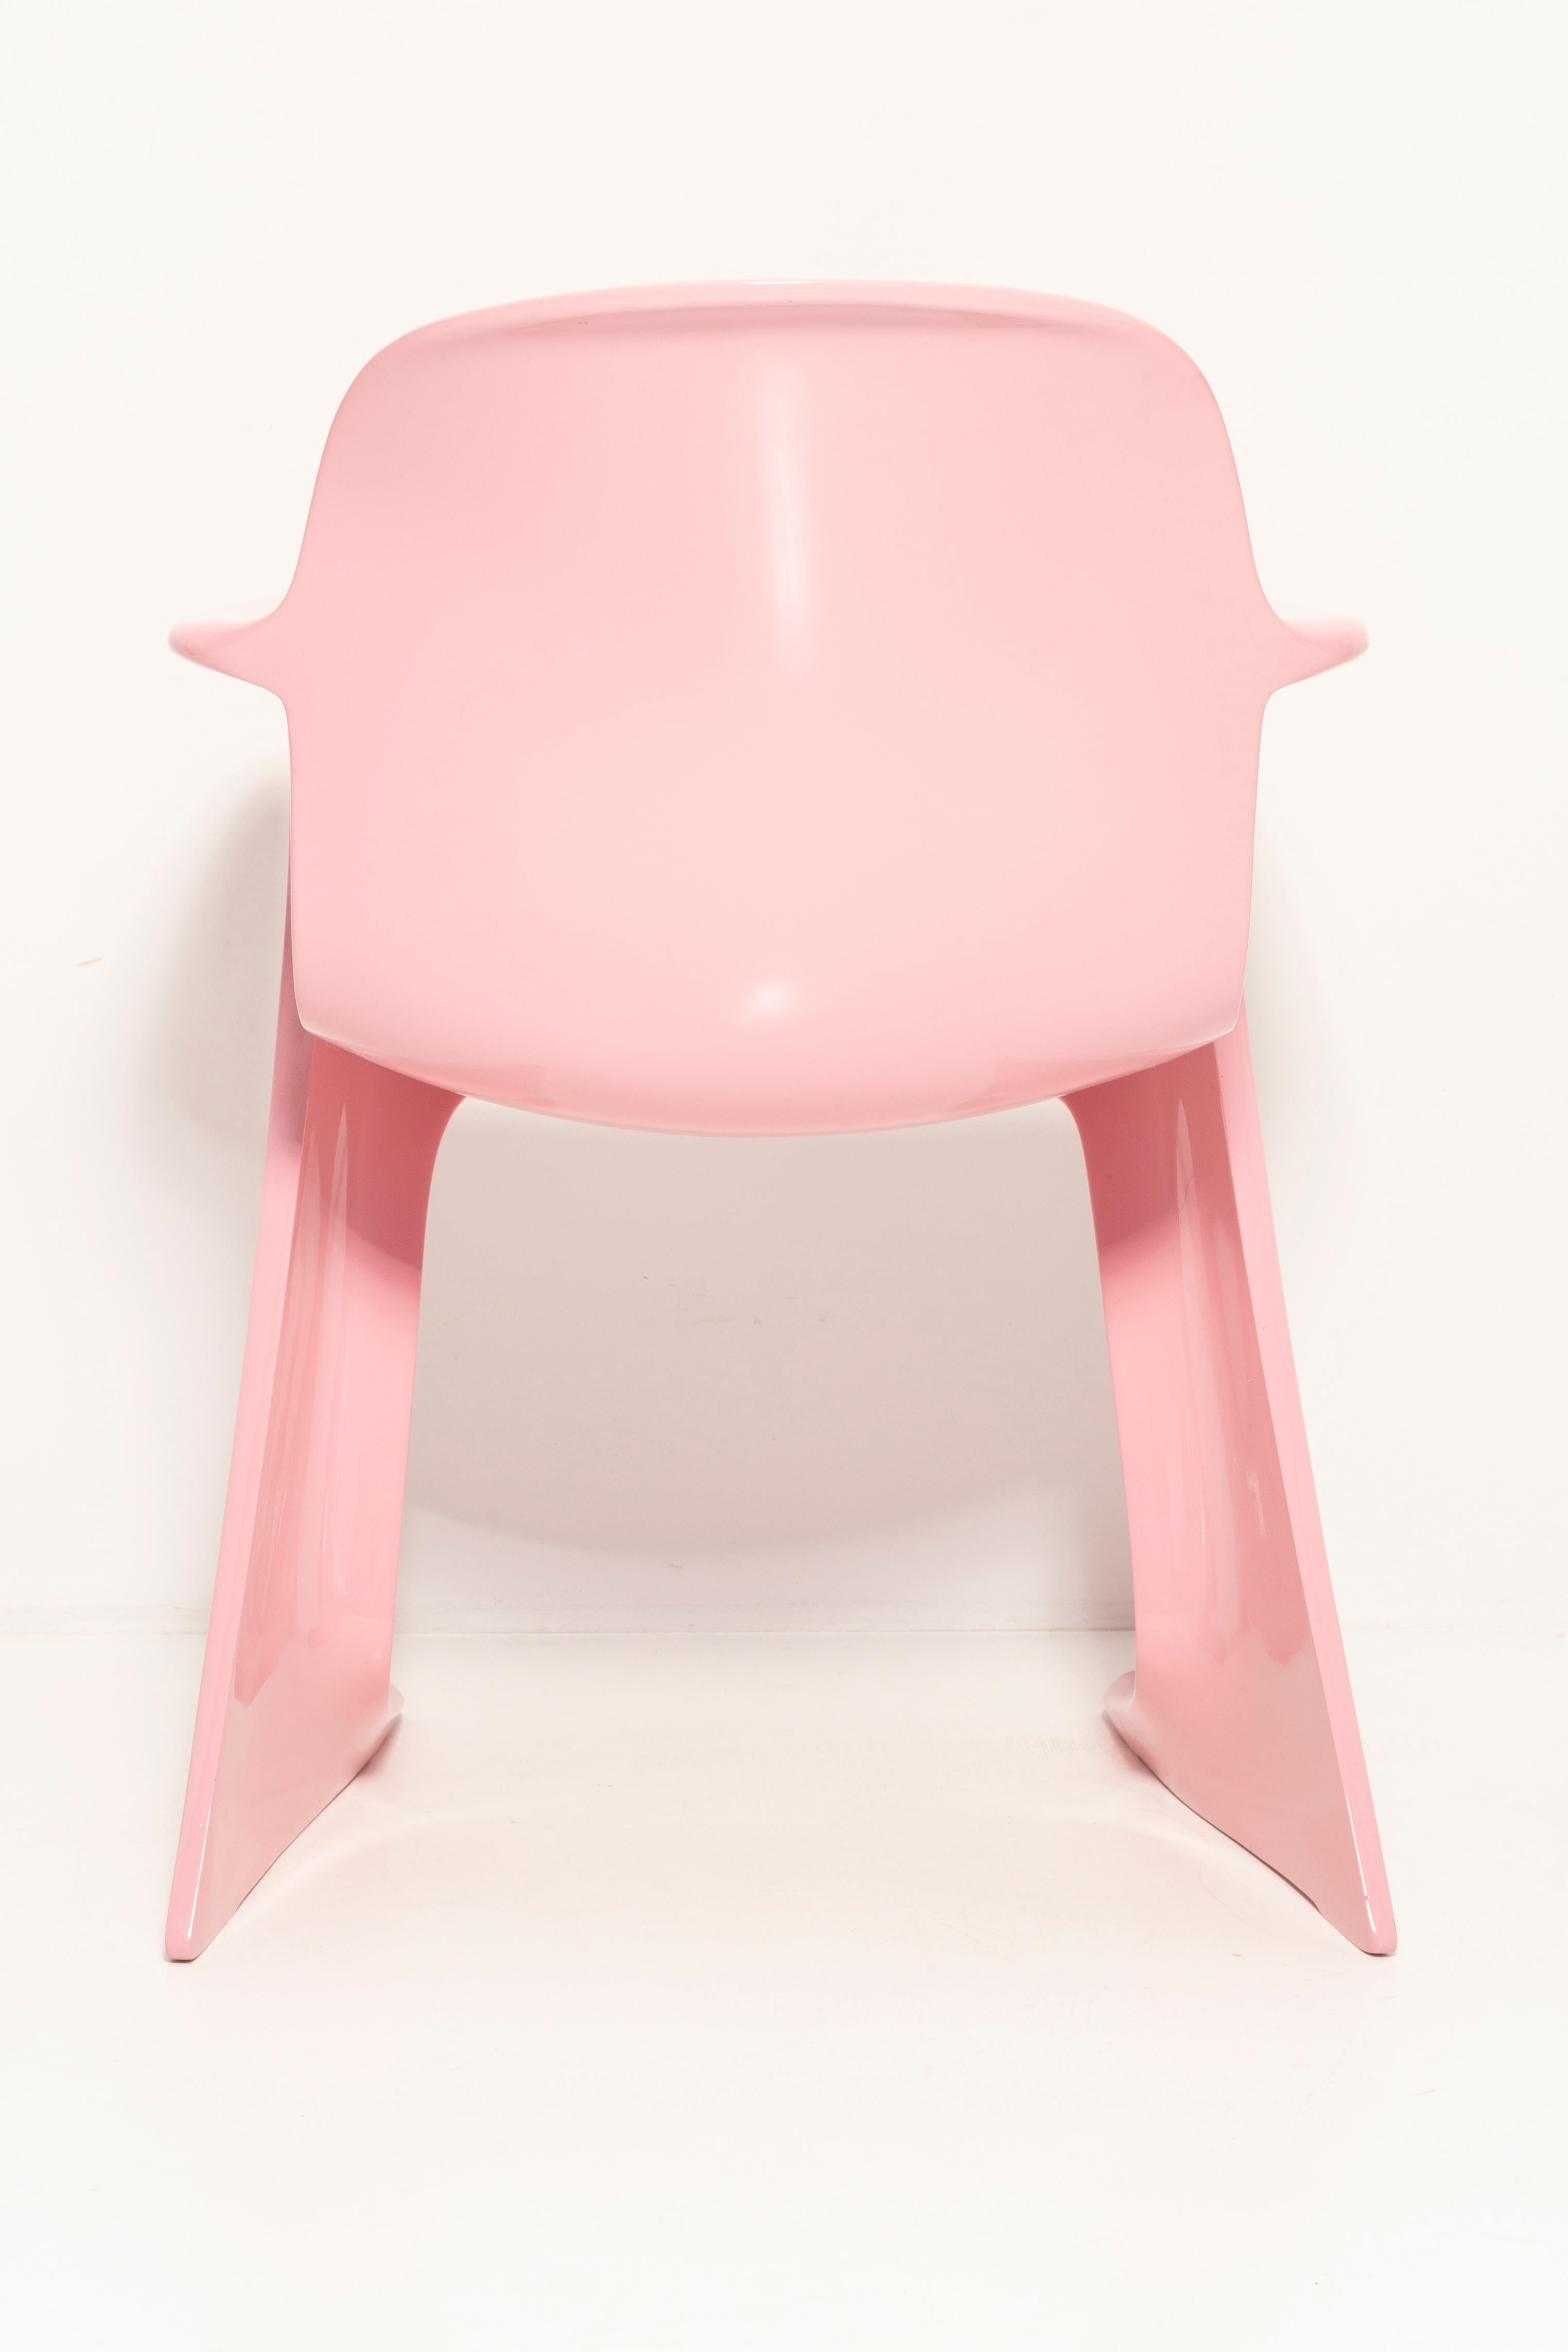 Set of Six Midcentury Pink Kangaroo Chairs, Ernst Moeckl, Germany, 1960s For Sale 7